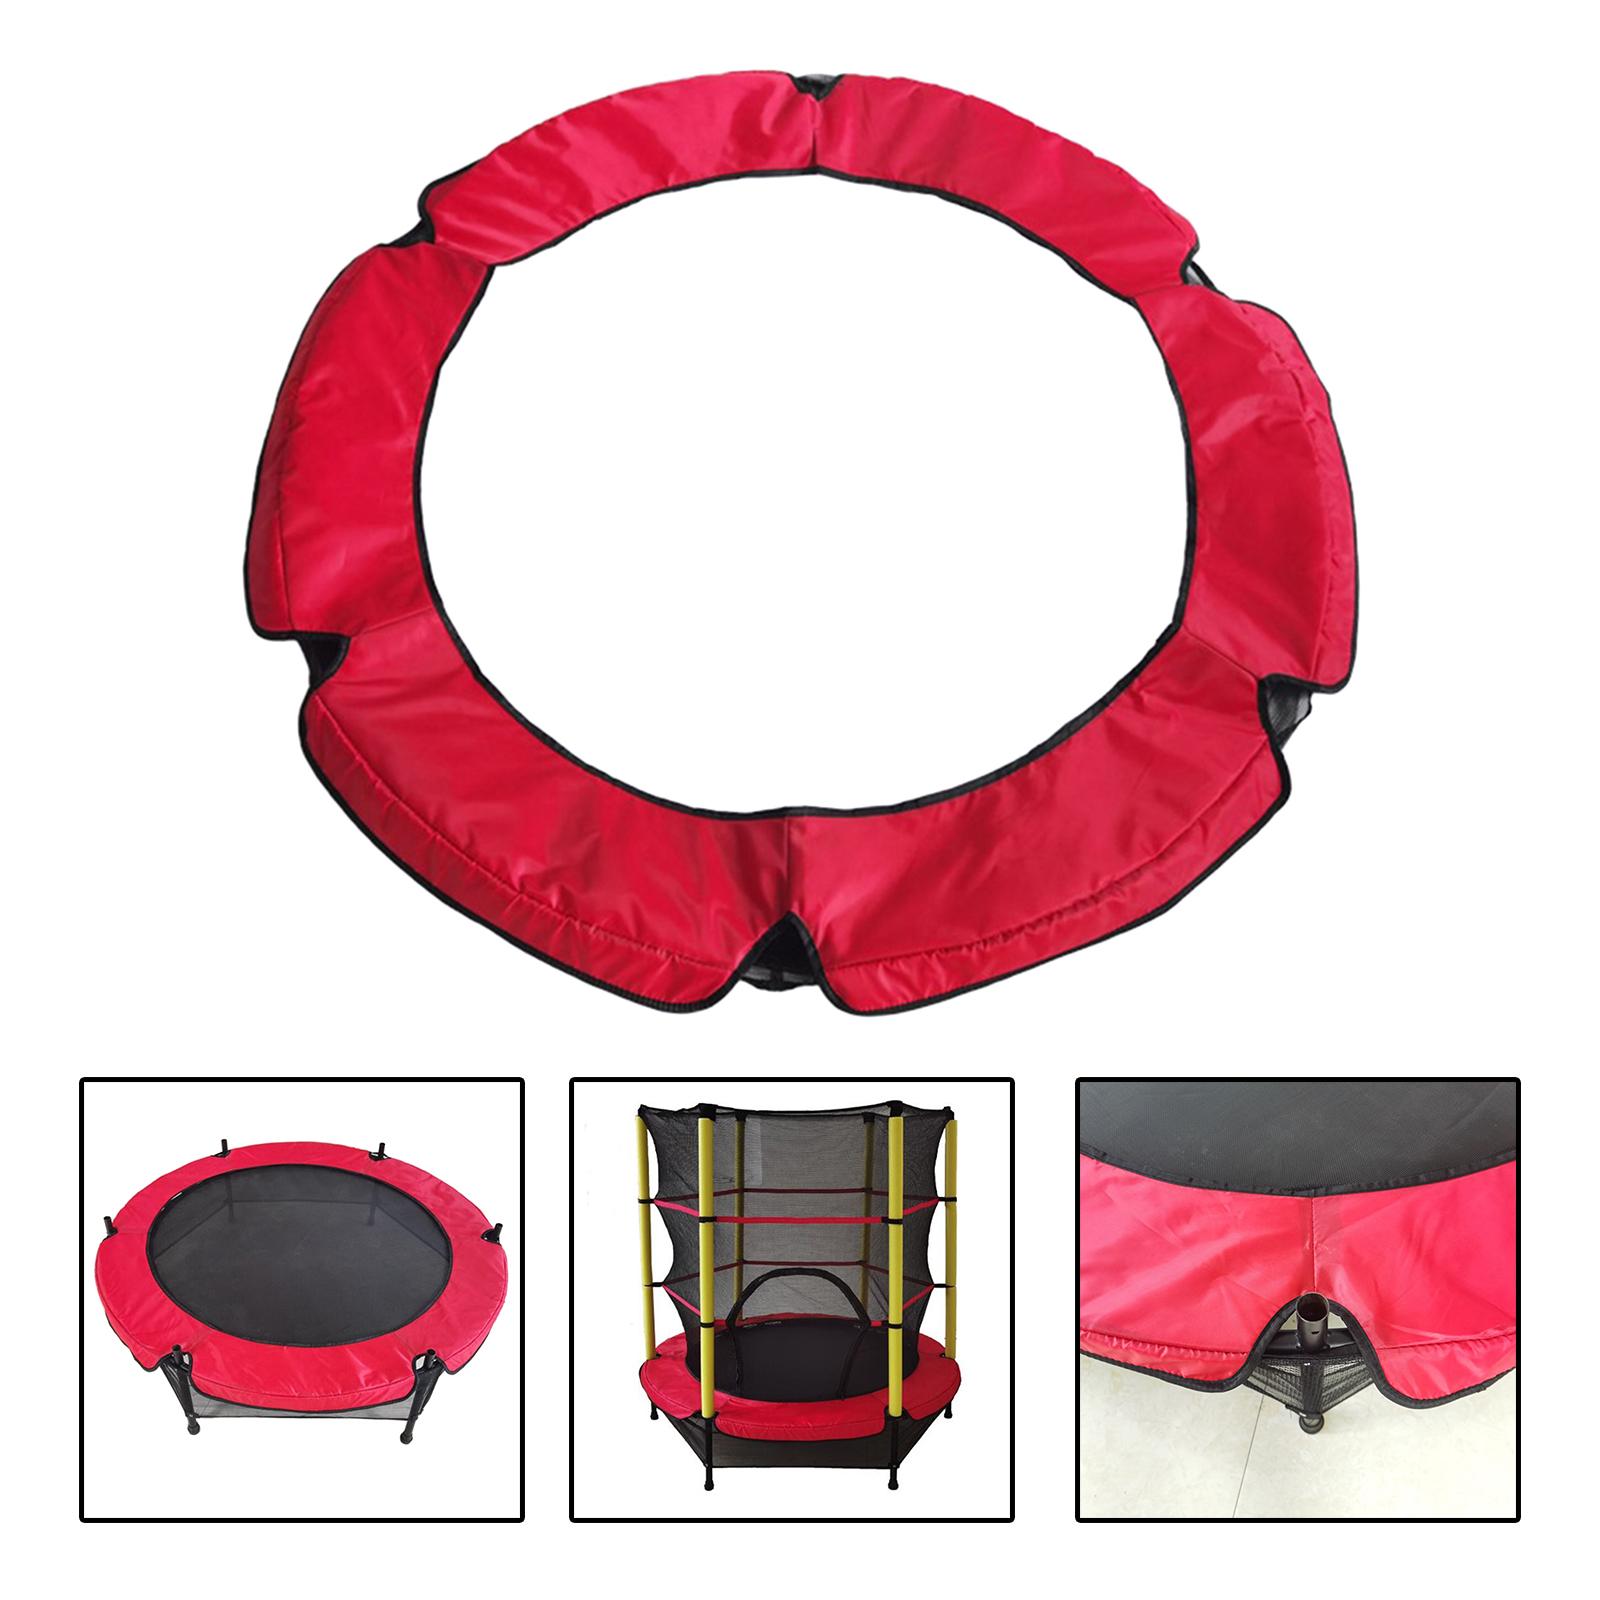 Trampoline Safety Pad Mat Waterproof Tear Resistant Round for Play Exercise